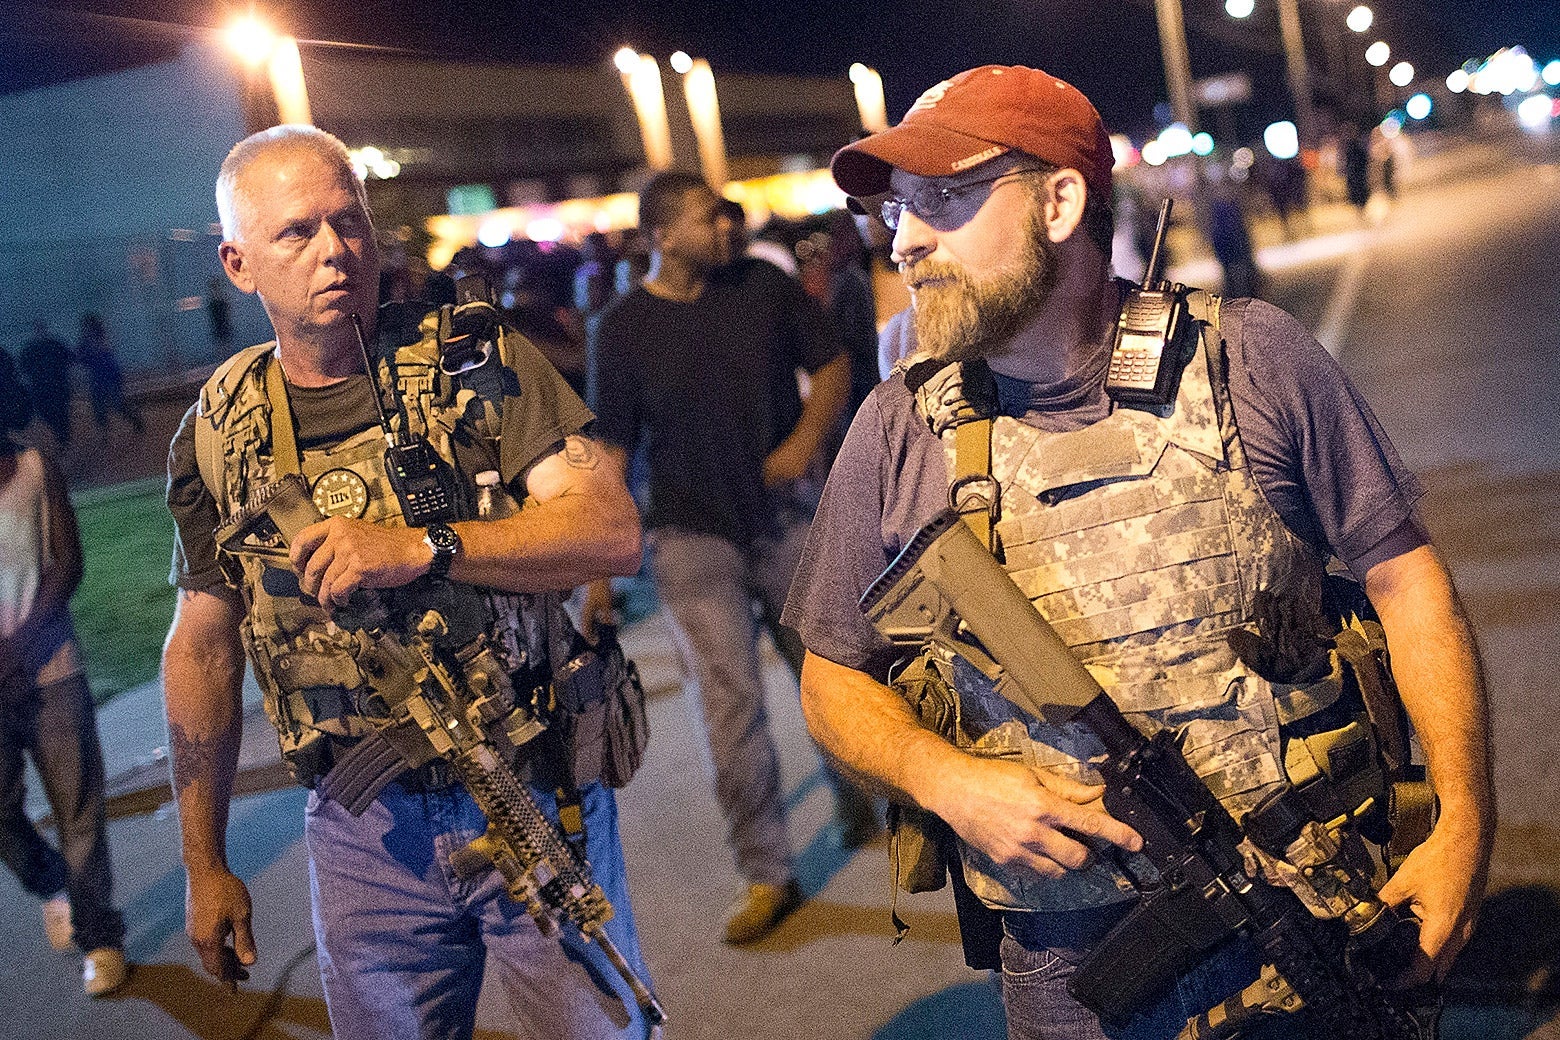 Two white Oath Keepers in tactical vests, one carrying his assault rifle and the other allowing it to hang from his holster, walk down the street. Behind them walk black protesters.